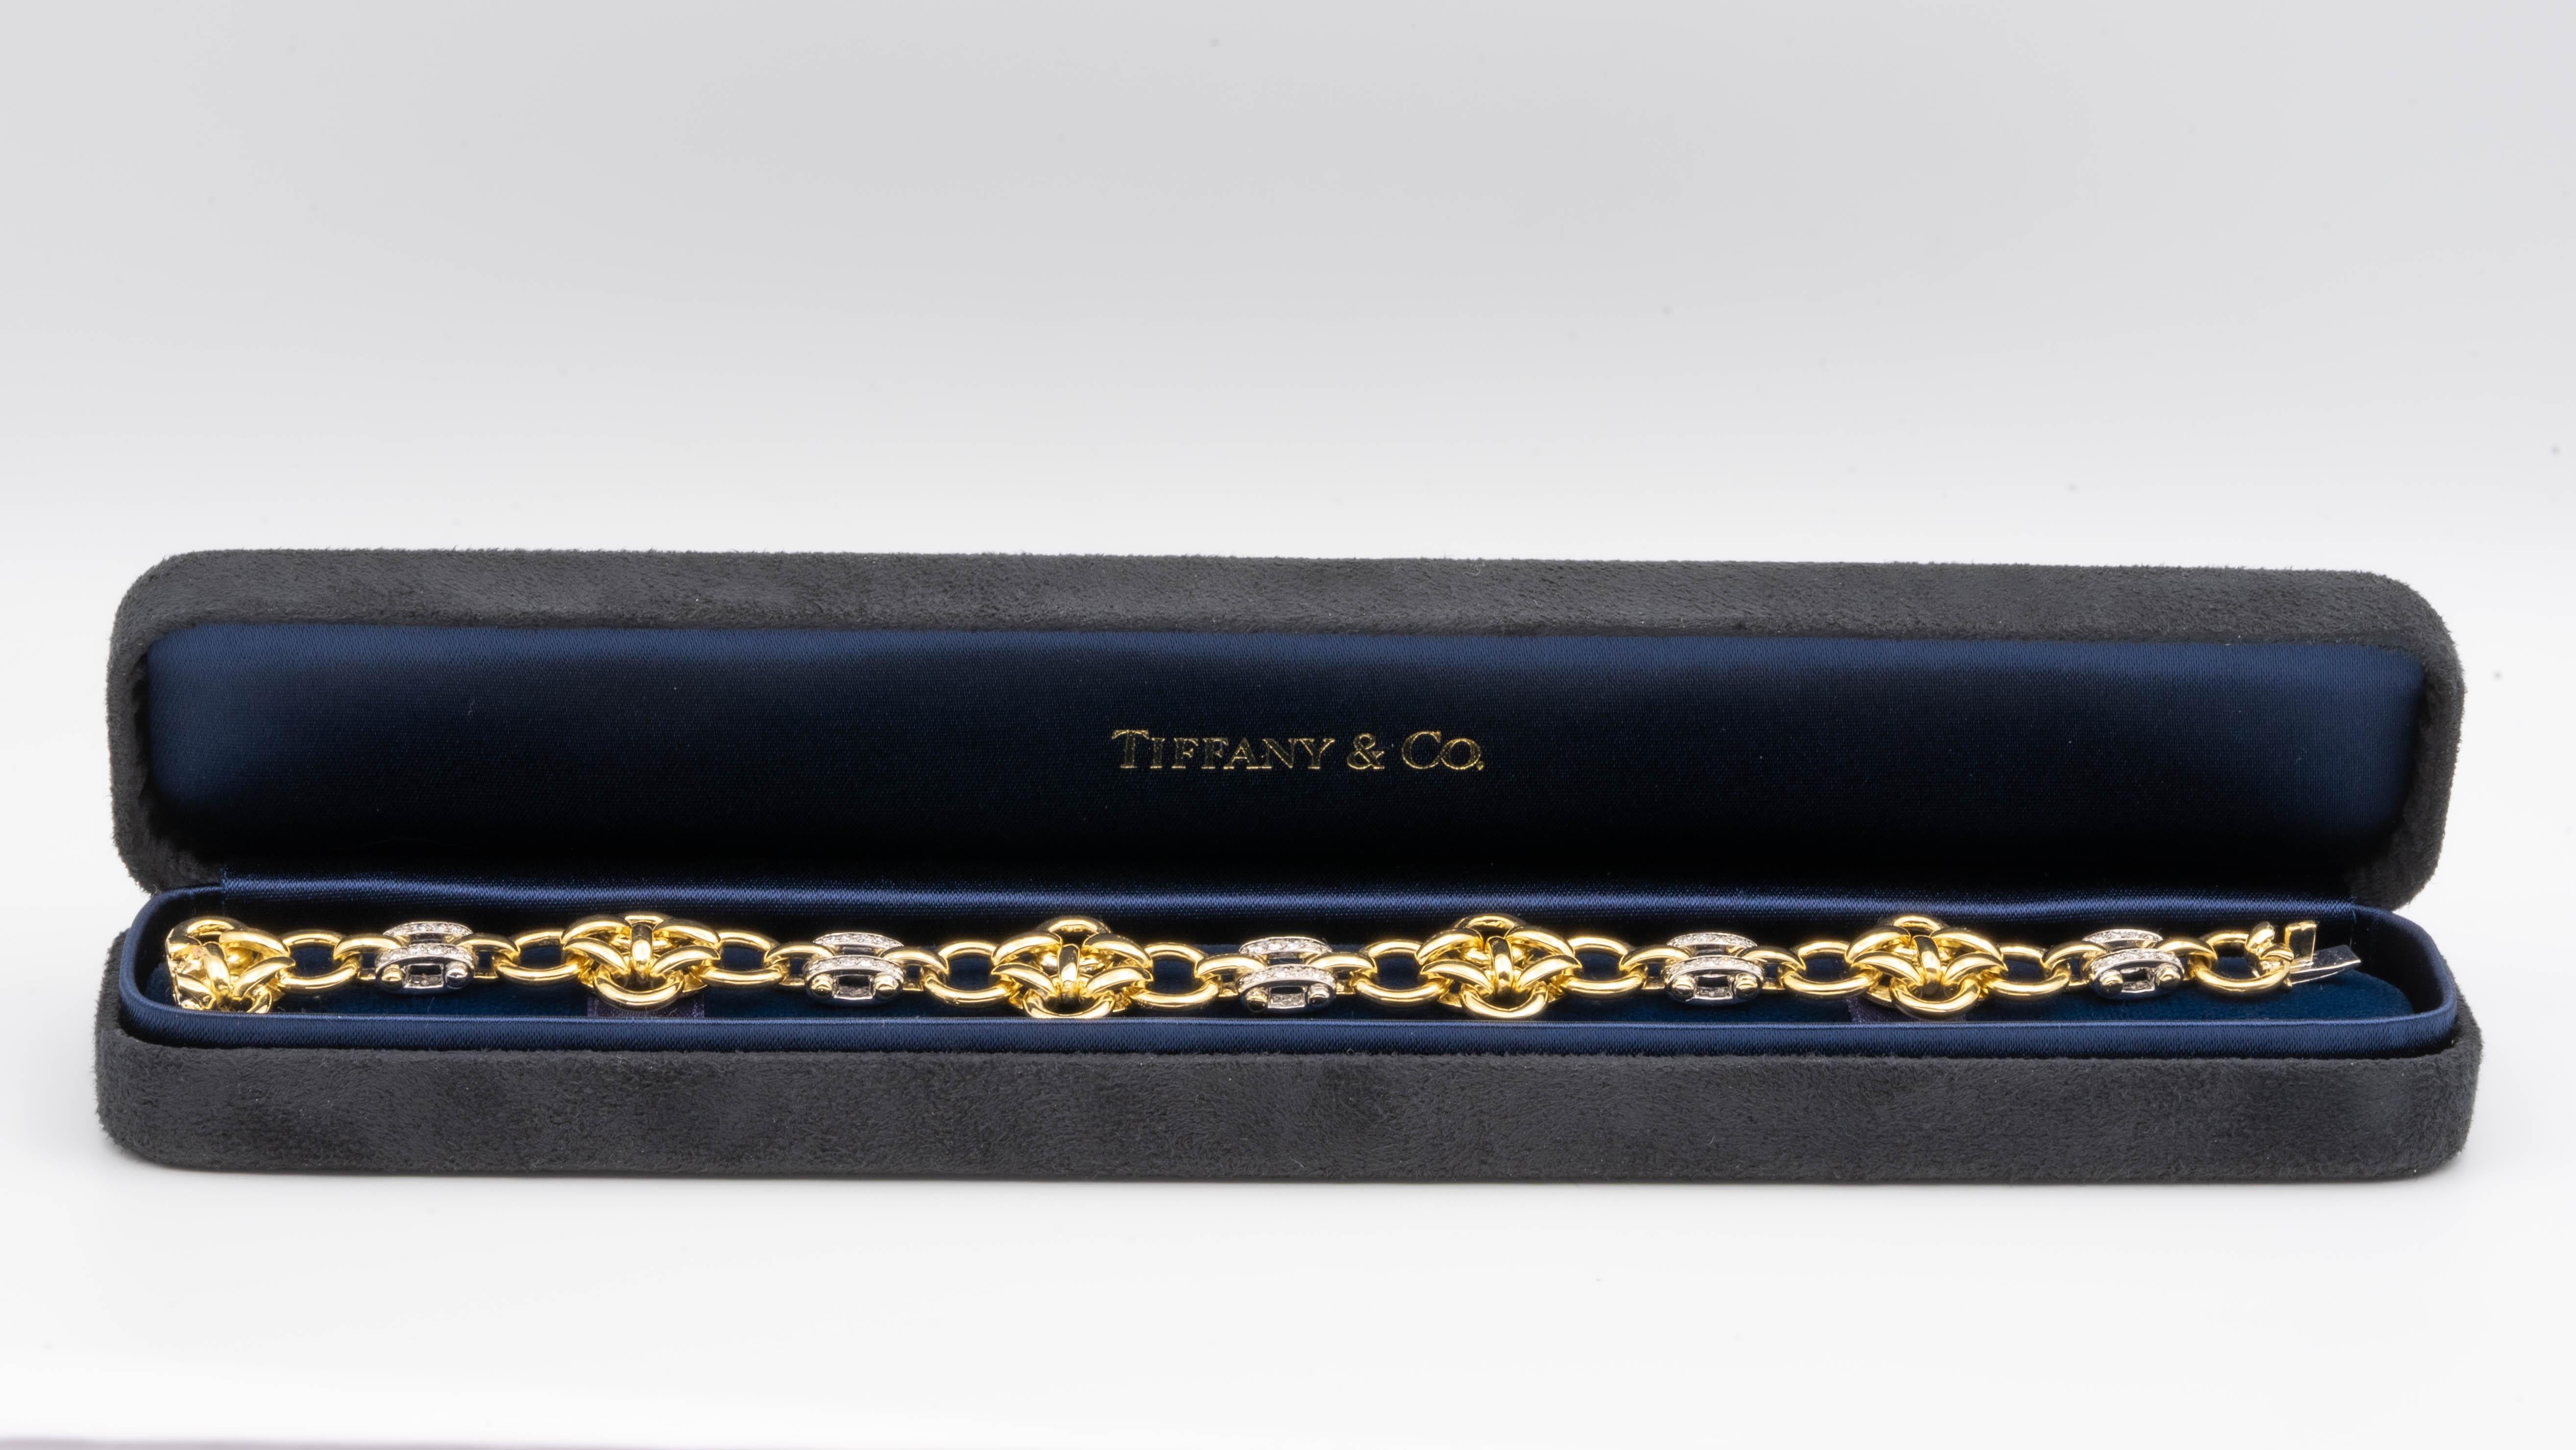 This Tiffany and Co. bracelet is a lot heavier than it looks, and has a very satisfying heft to it. It's finely crafted in 18 Karat gold with Quatrefoil round yellow gold links, spaced by white gold bars. The double row channel style bars are set